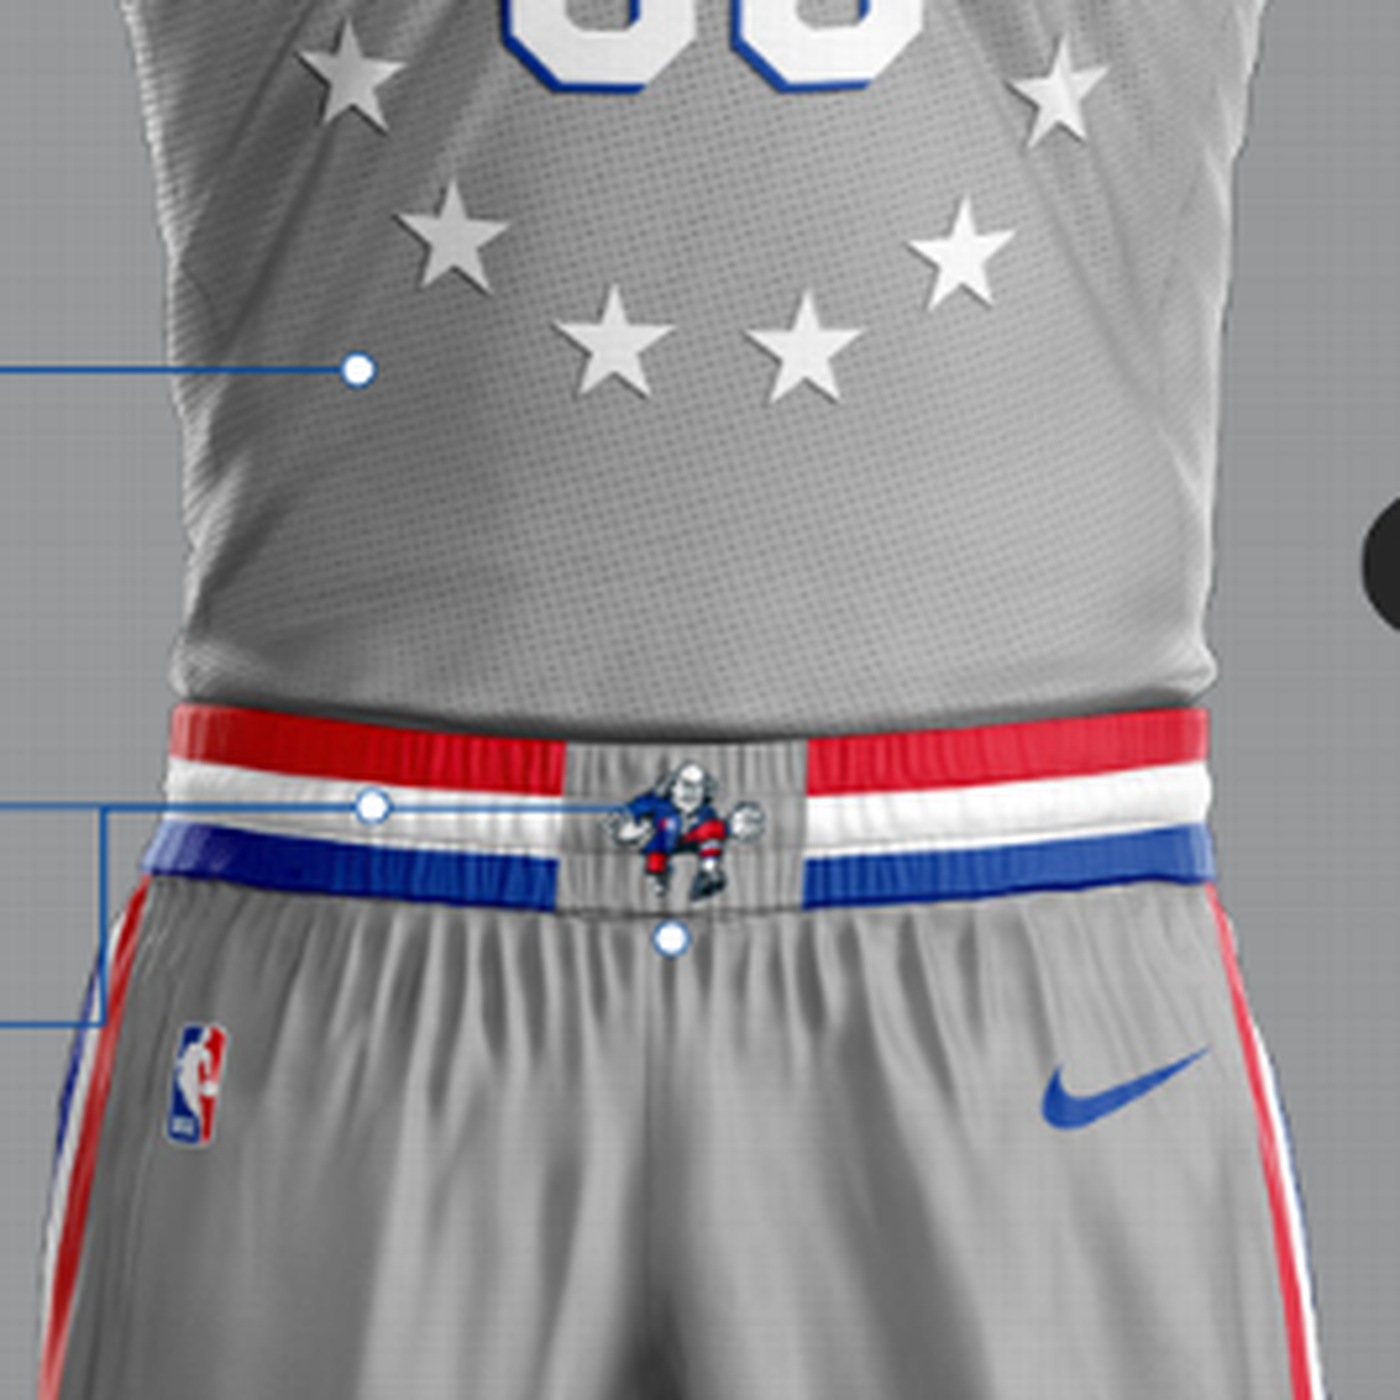 The Sixers' Alternate Uniforms are Beautiful (Despite Exhausted